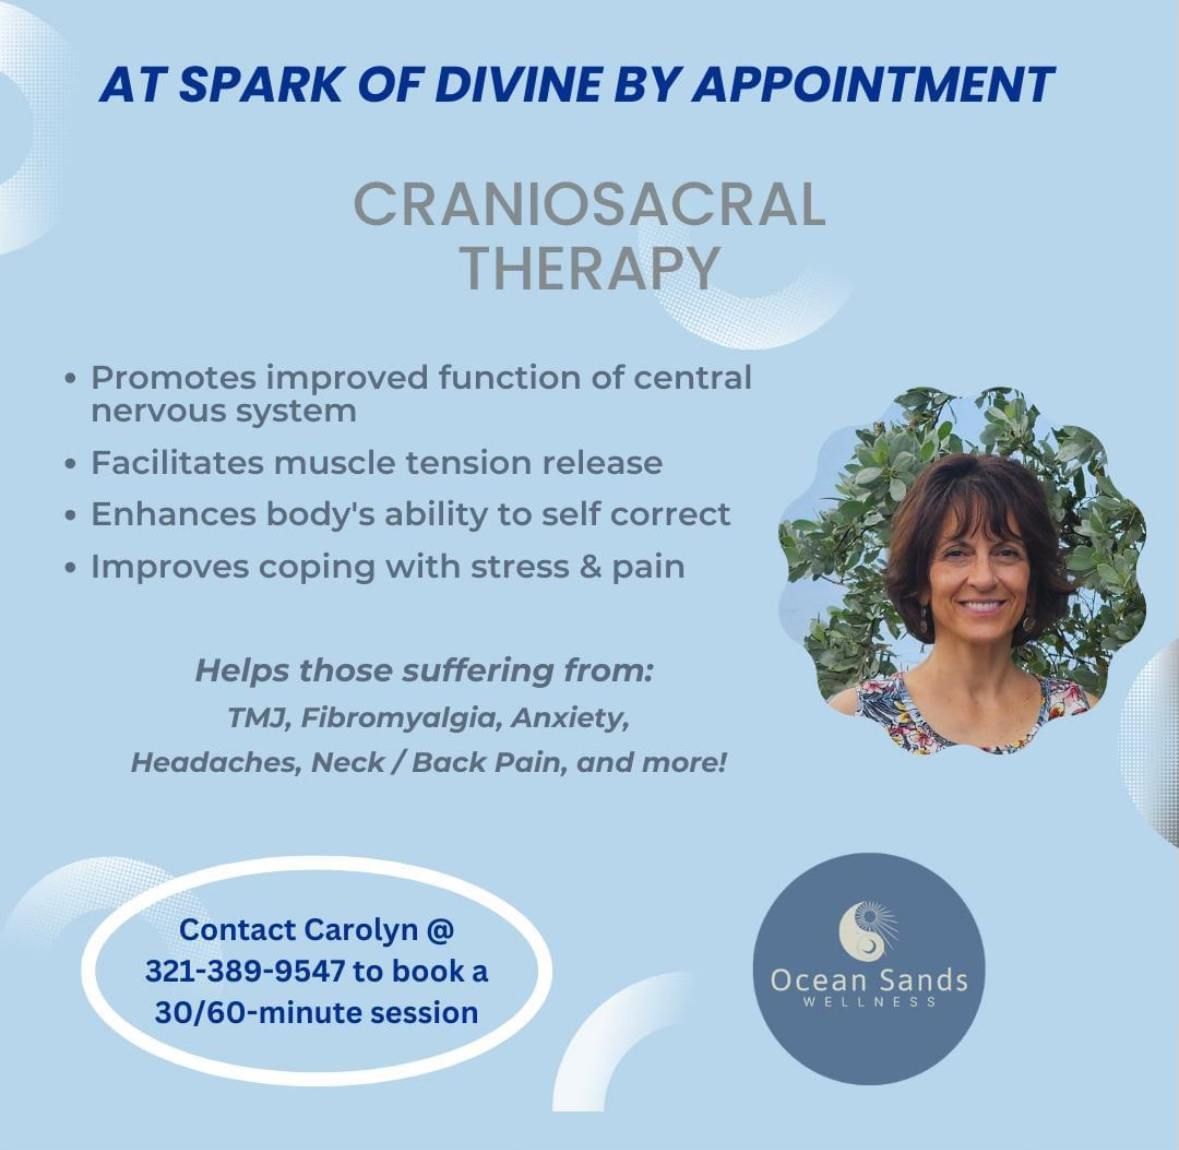 Craniosacral therapy (CST) with Carolyn